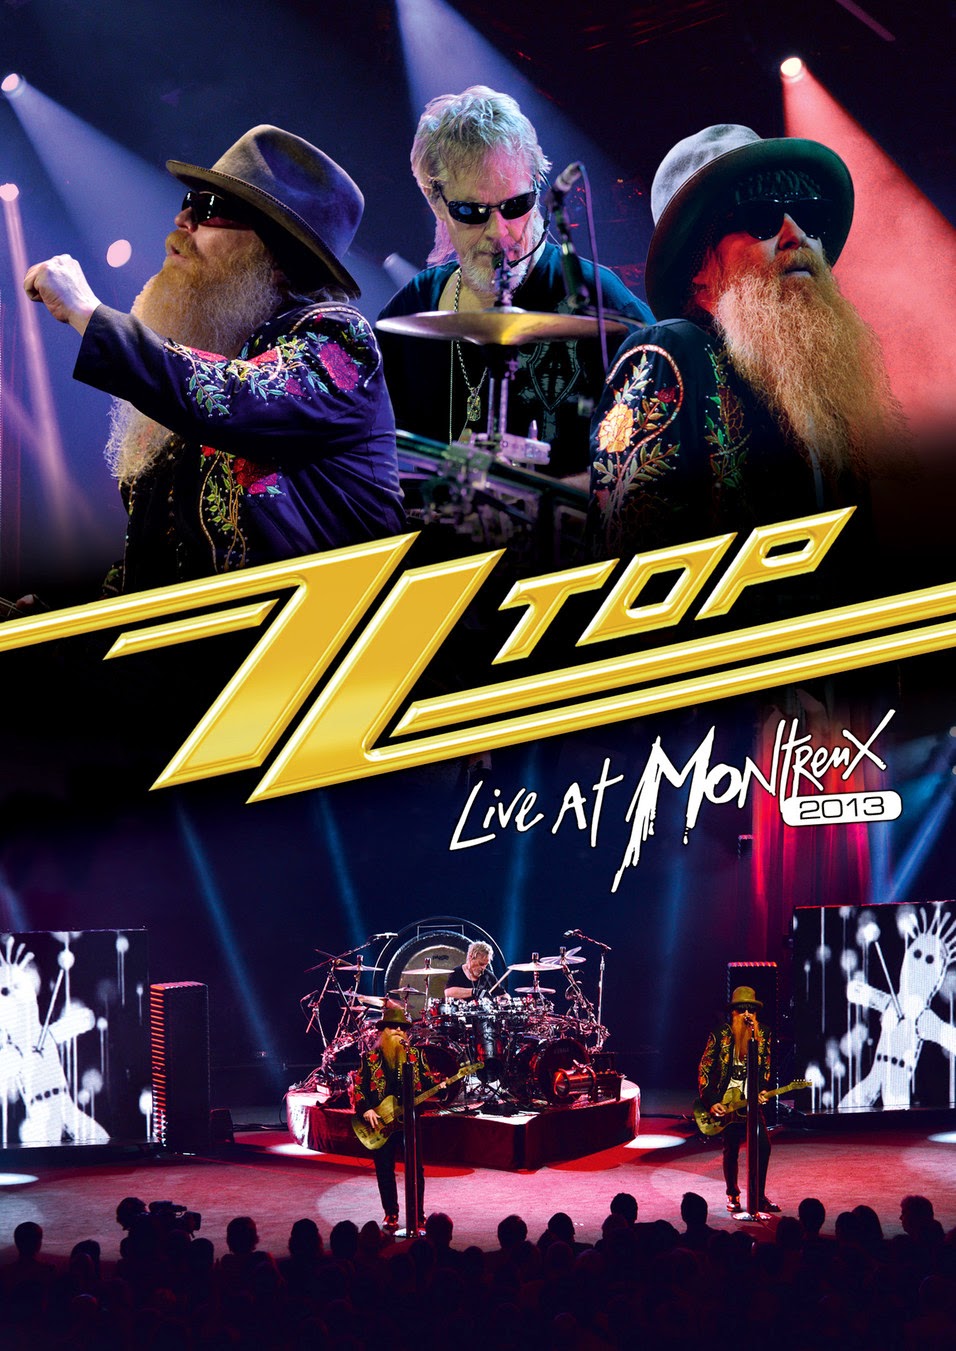 ZZ Top Live at Montreux 2013, nuevo DVD y Blu-ray